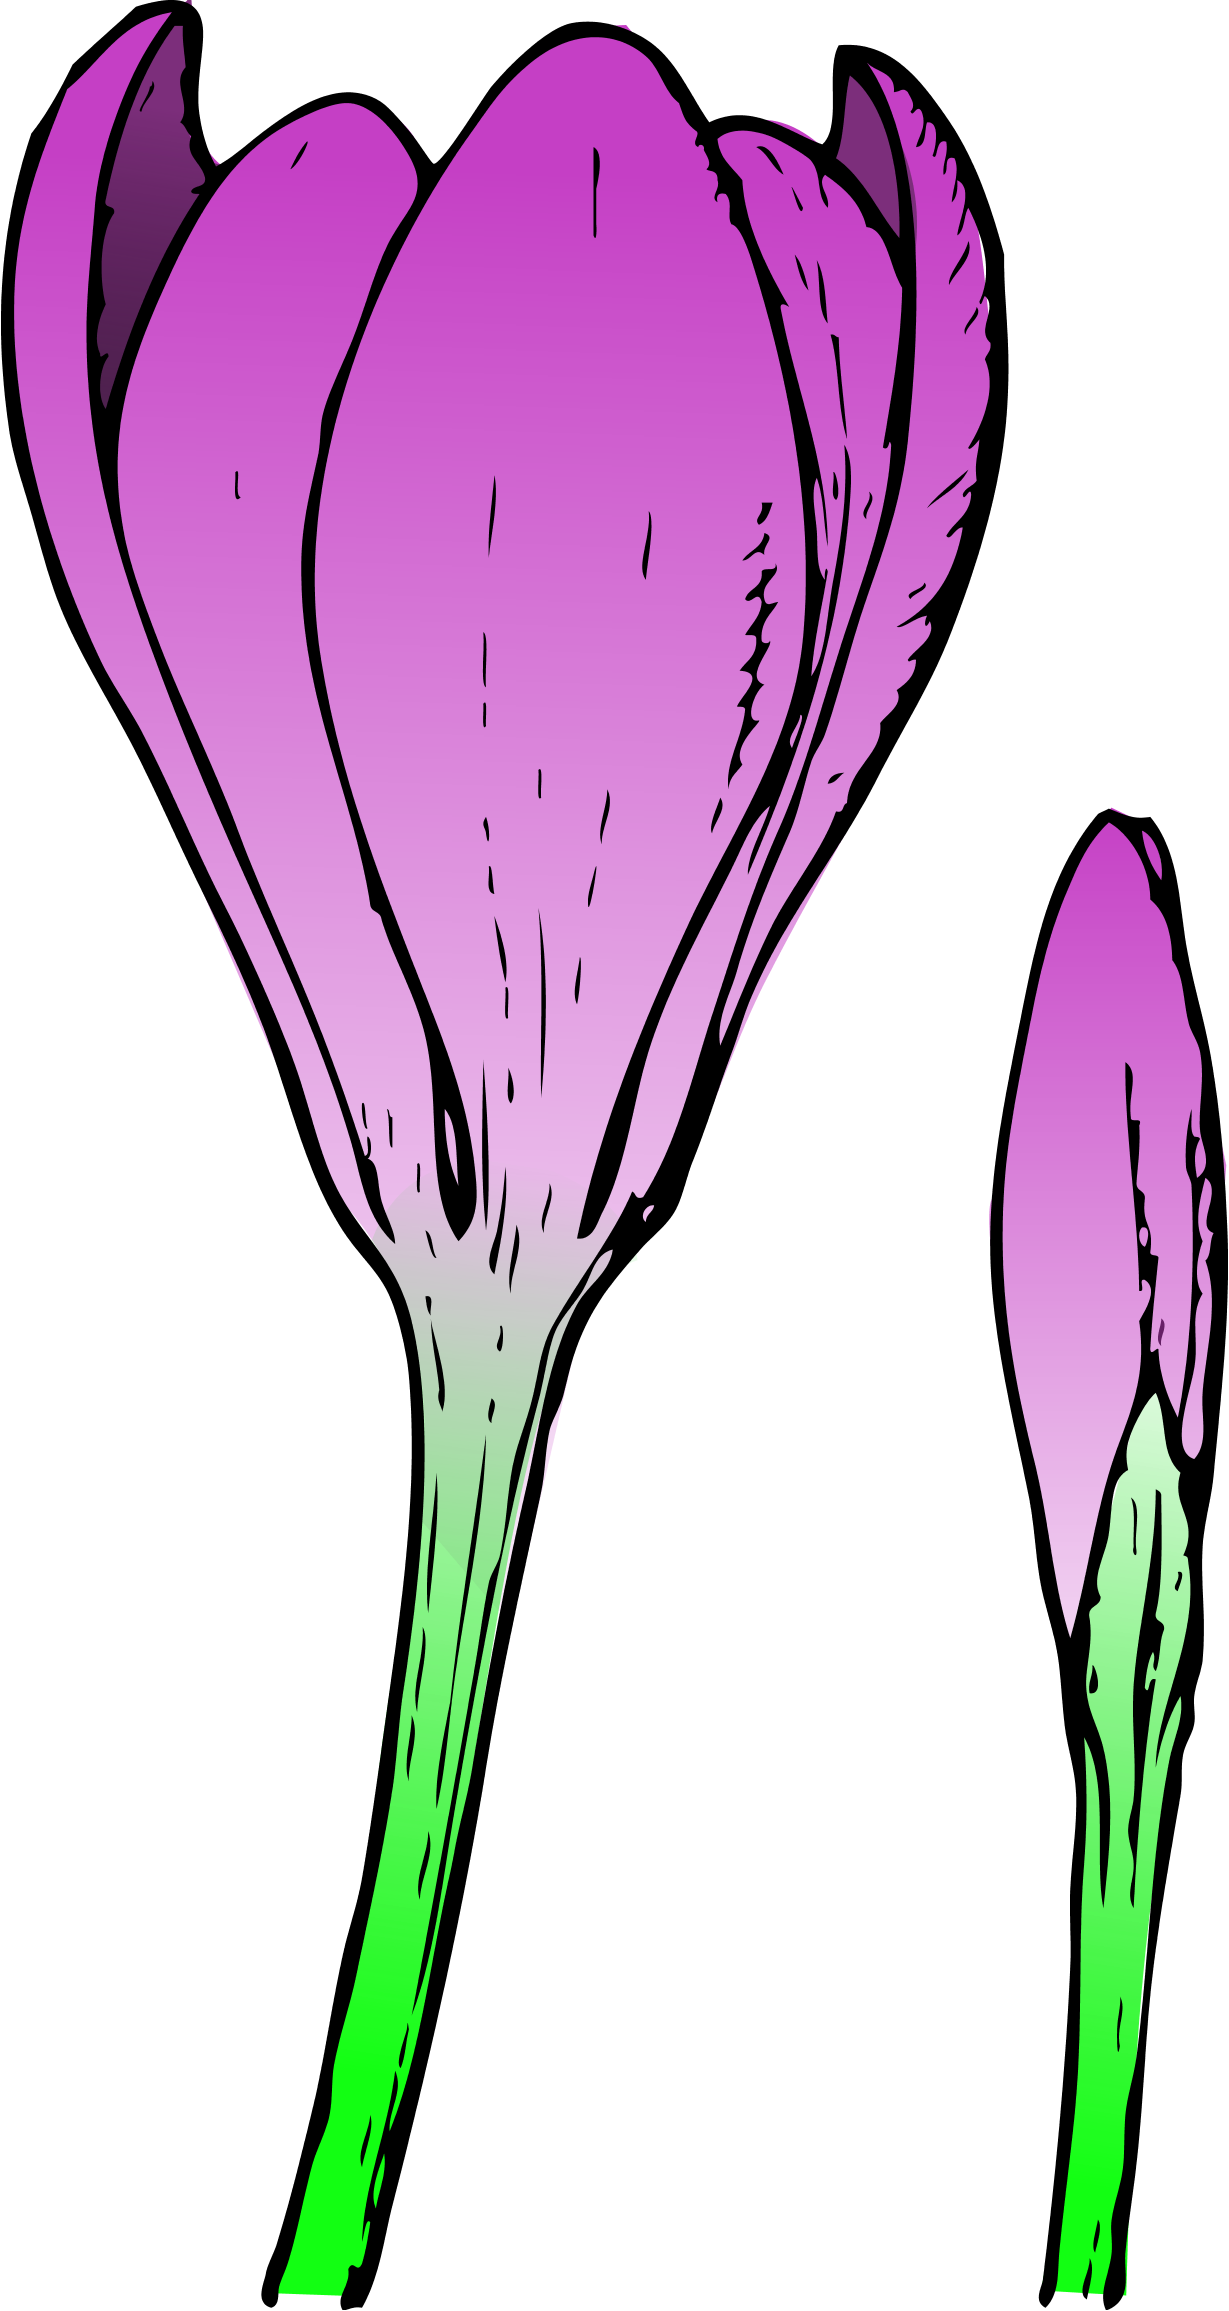 Crocus Flower and Bud Colored Spring Flowers 2011 Clip Art SVG ...